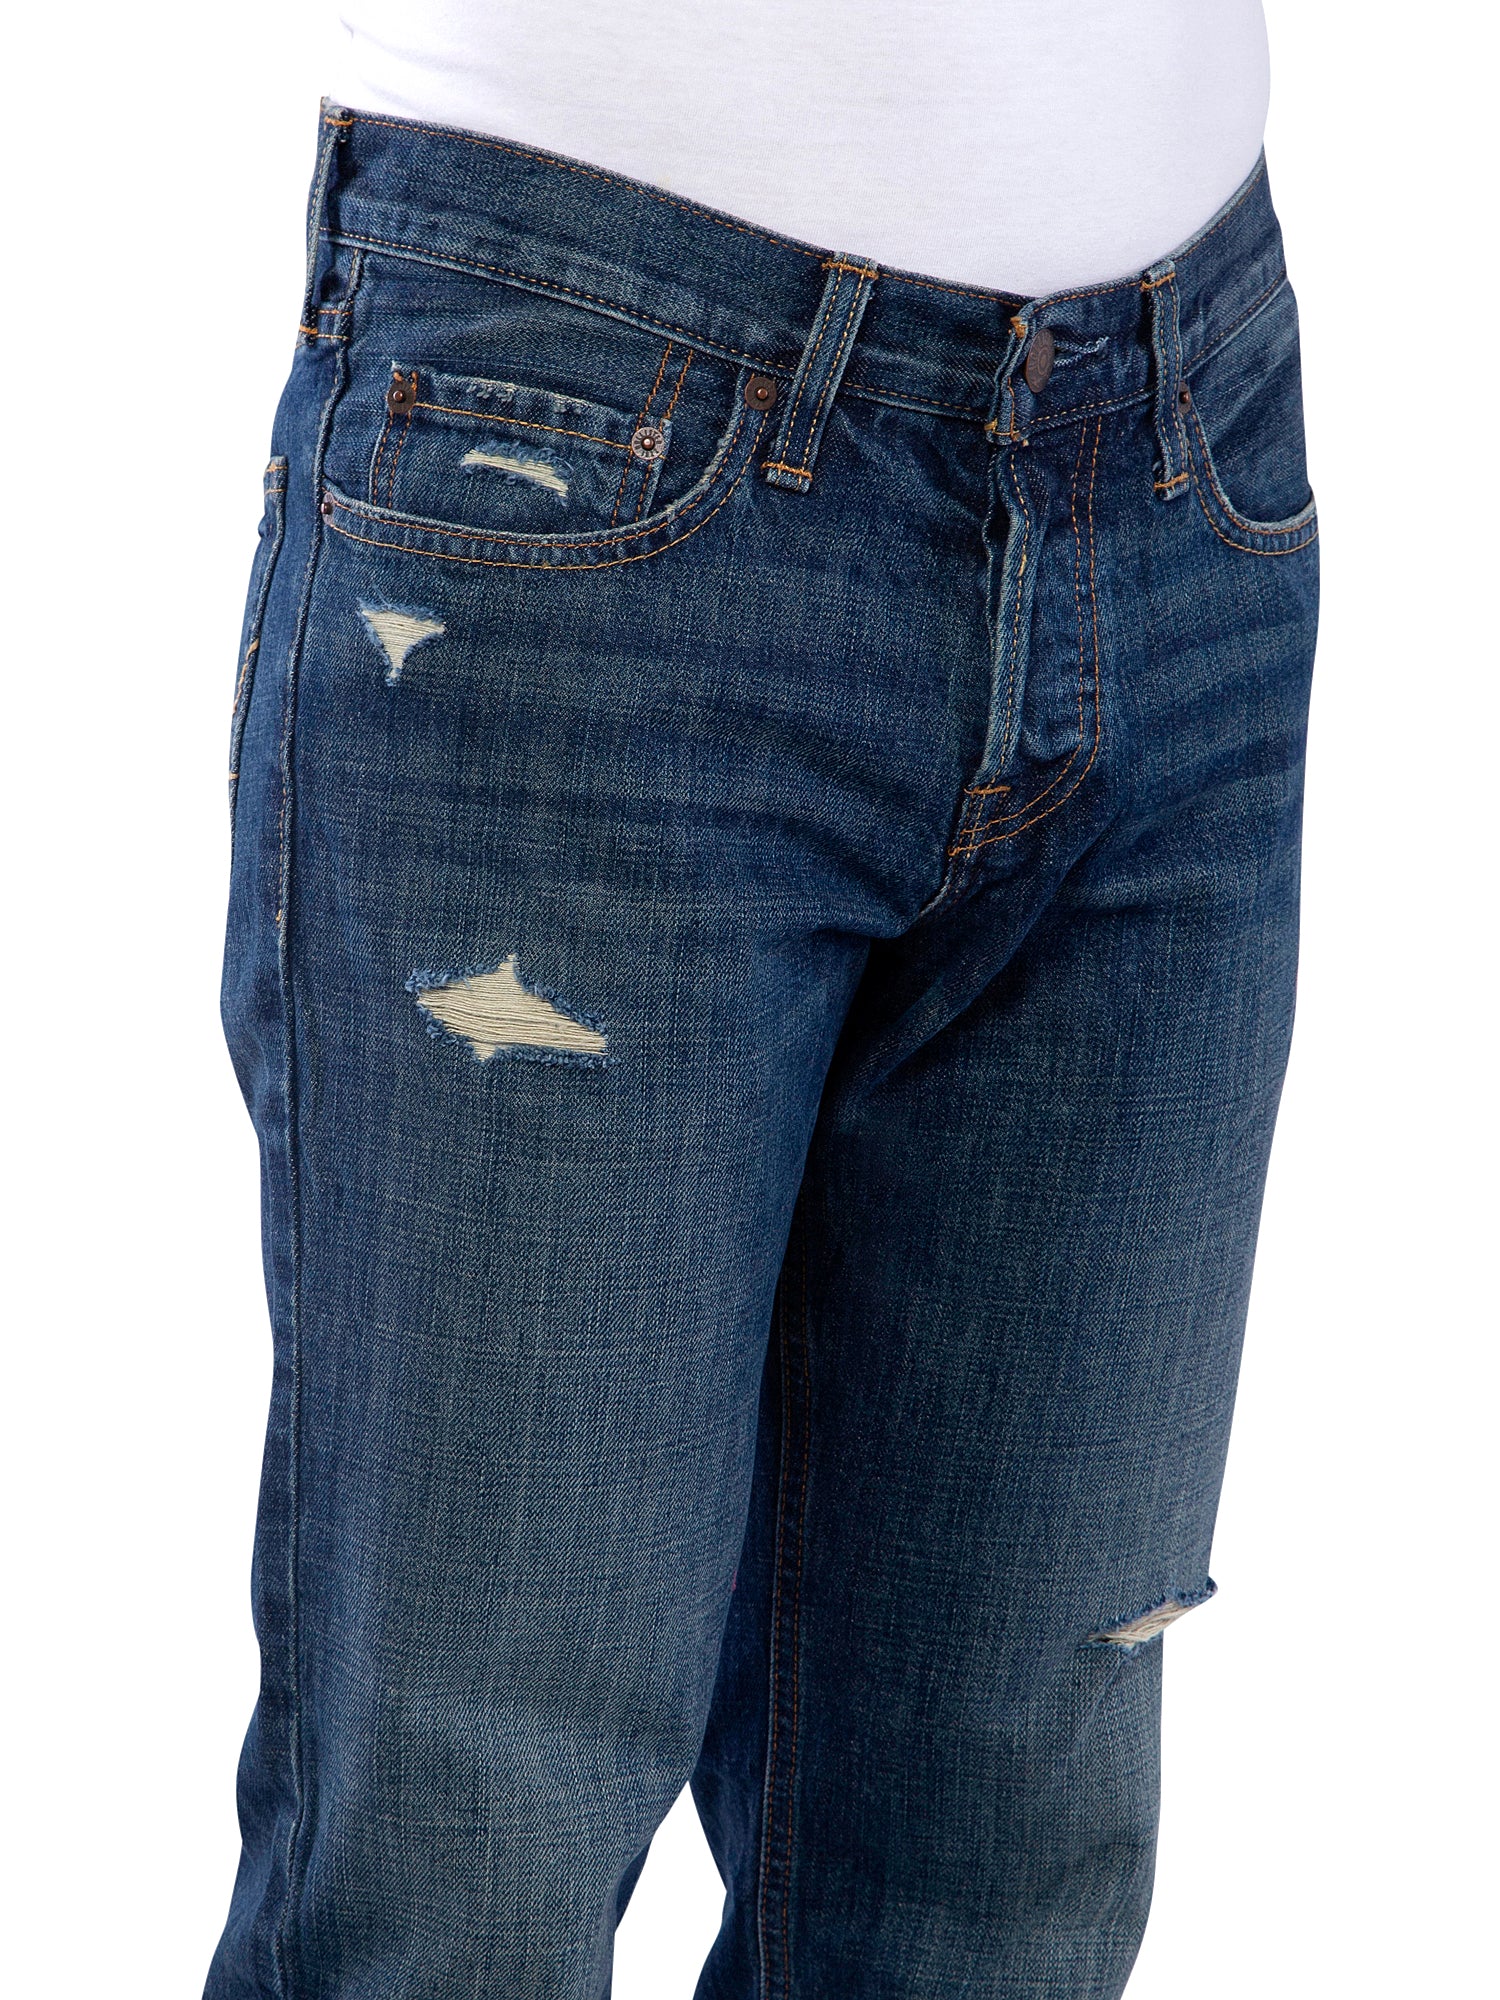 hollister jeans return policy